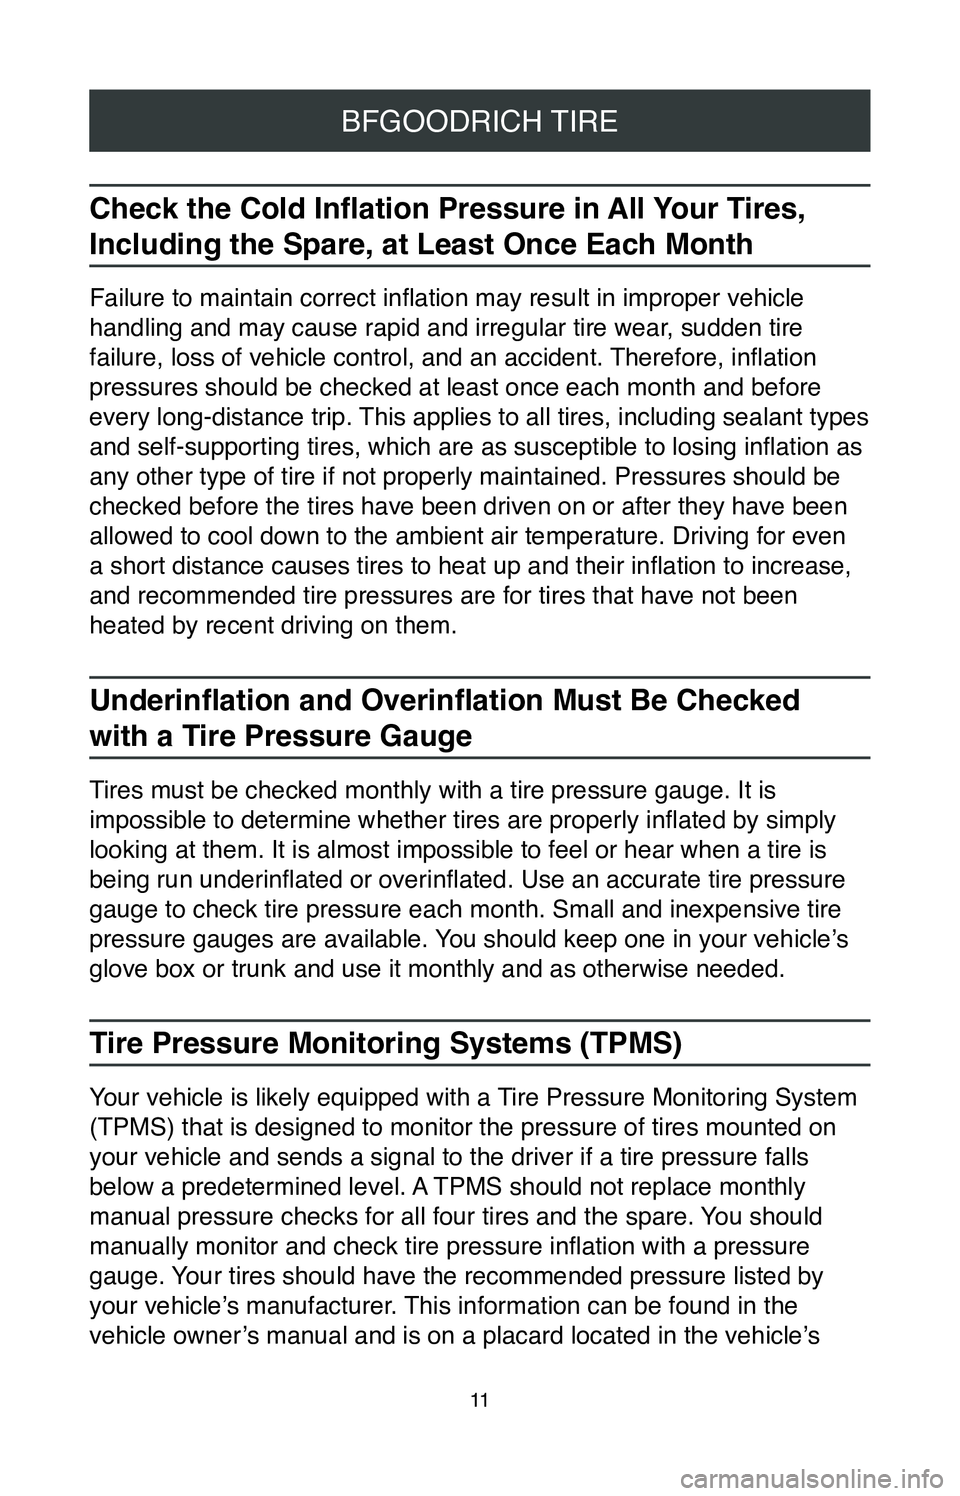 TOYOTA YARIS 2020  Warranties & Maintenance Guides (in English) 11
BFGOODRICH TIRE
Check the Cold Inflation Pressure in All Your Tires, 
Including the Spare, at Least Once Each Month
Failure to maintain correct inflation may result in improper vehicle 
handling an